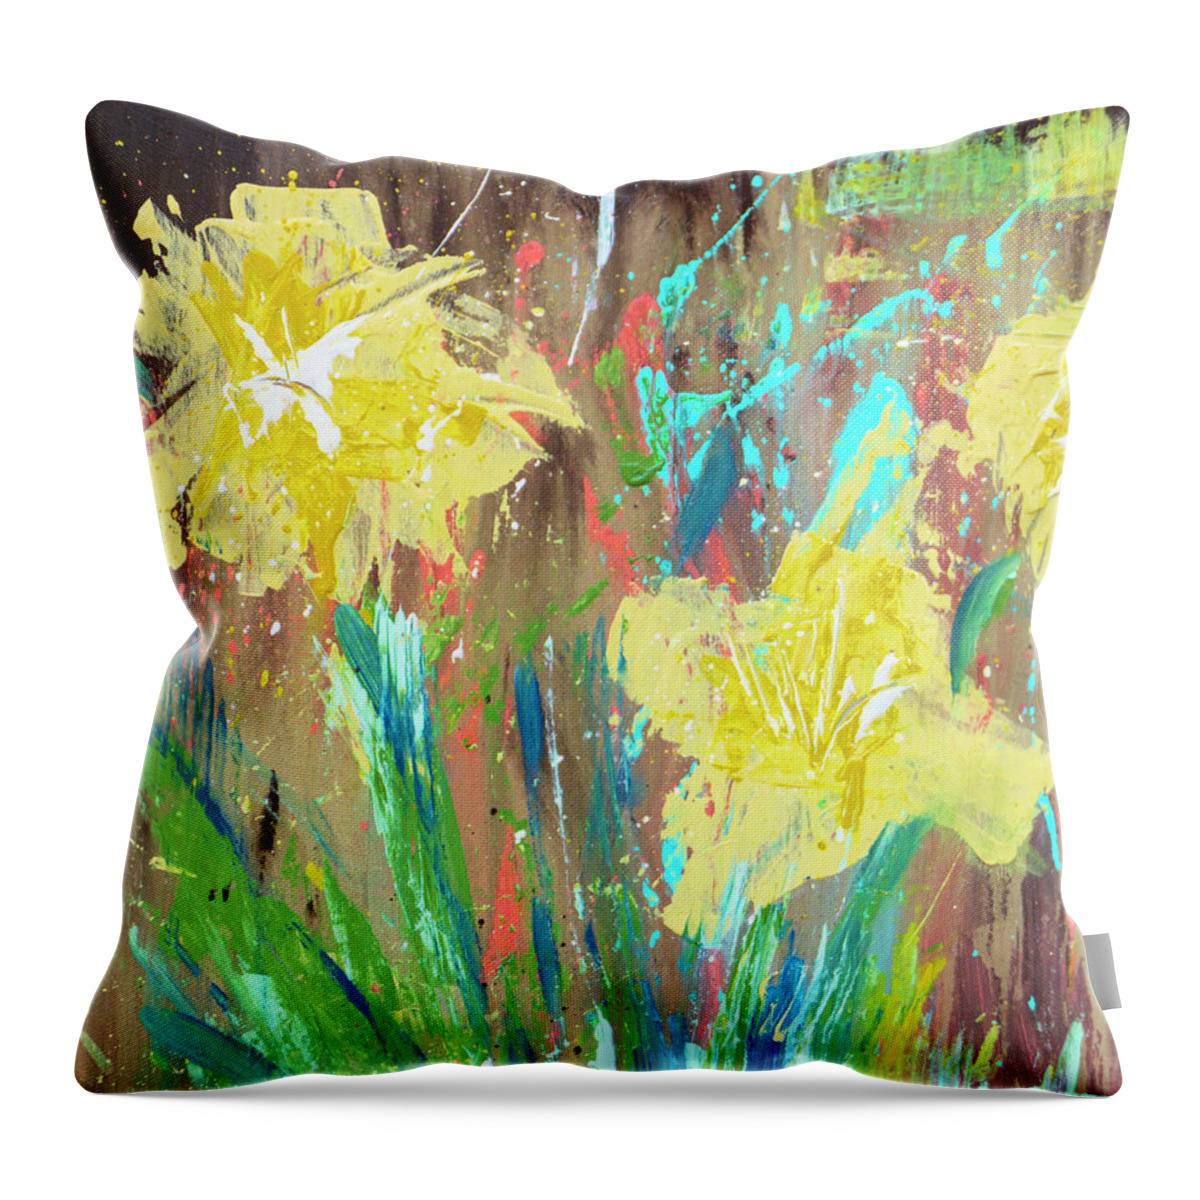 Bohemian Throw Pillow featuring the painting Sping Daffodil Yellow Floral Abstract by Joanne Herrmann